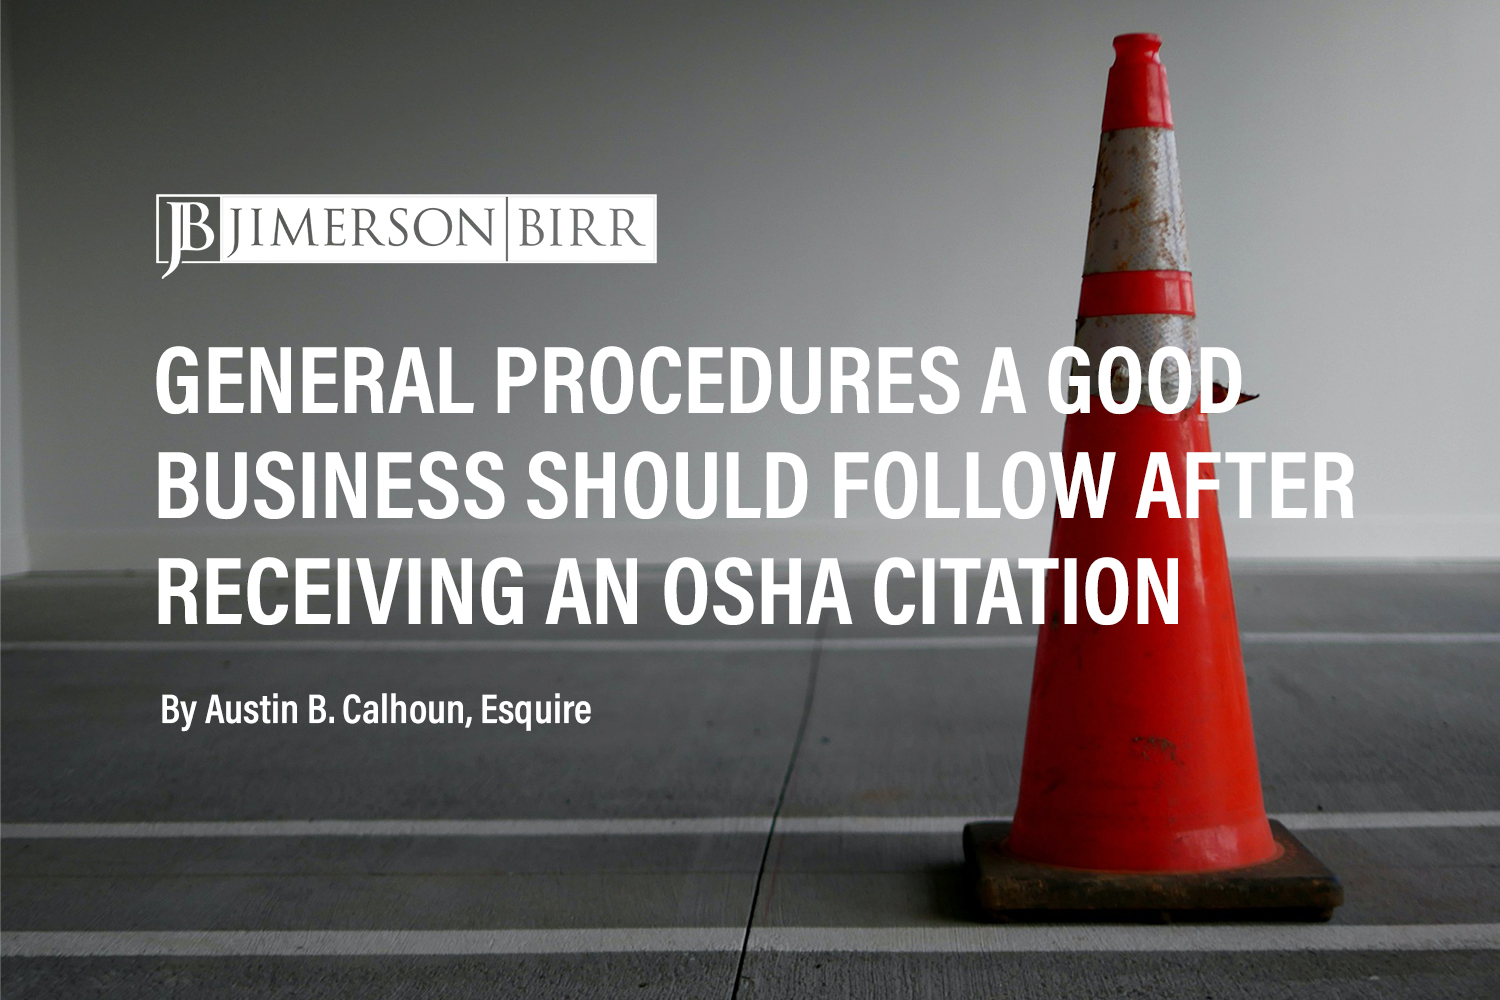 You Received an OSHA Citation, Now What? Steps Any Business Should Consider in Response to an OSHA Citation